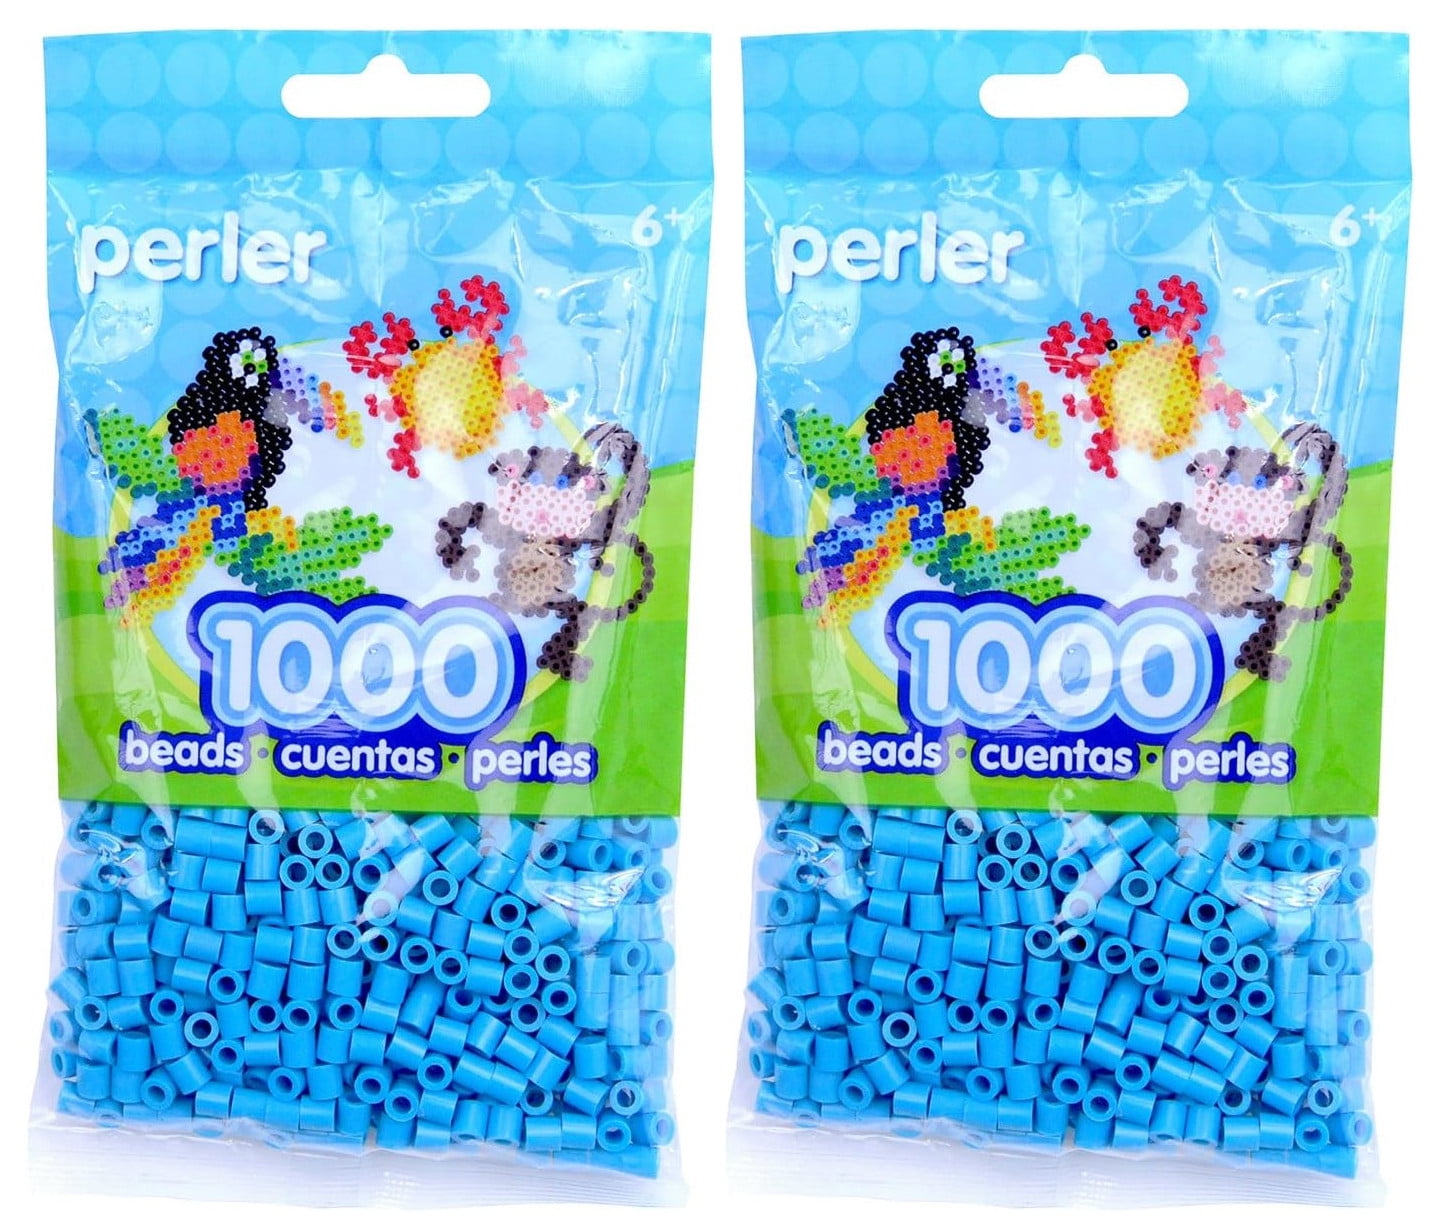 Get 1000 Prickly Pear Perler Beads - Great Selection & Prices